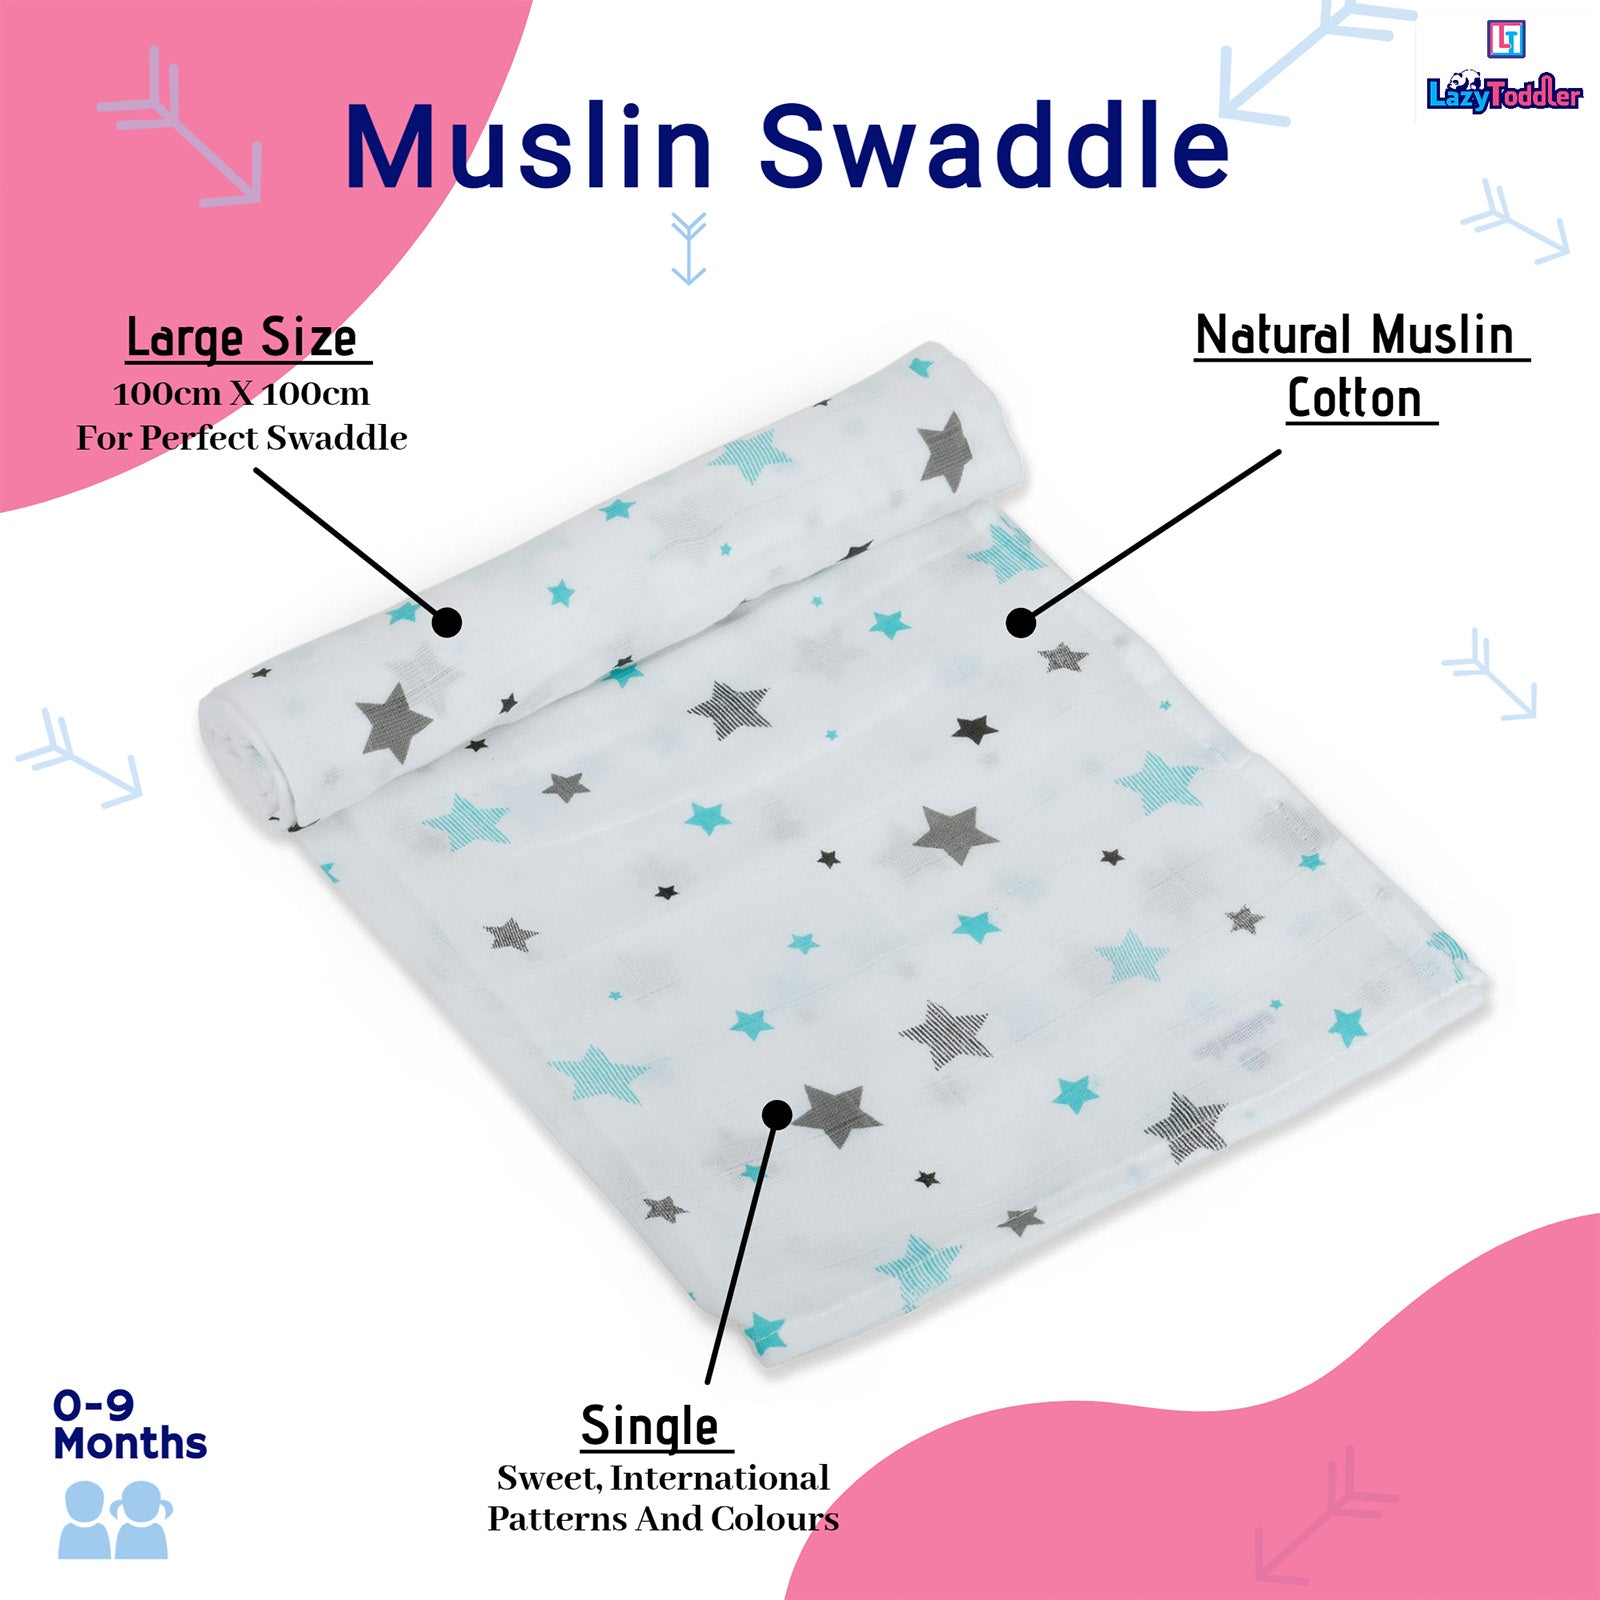 Adorable swaddle designs Swaddle comfort for infants Baby shower gift ideas Blankets for newborns'